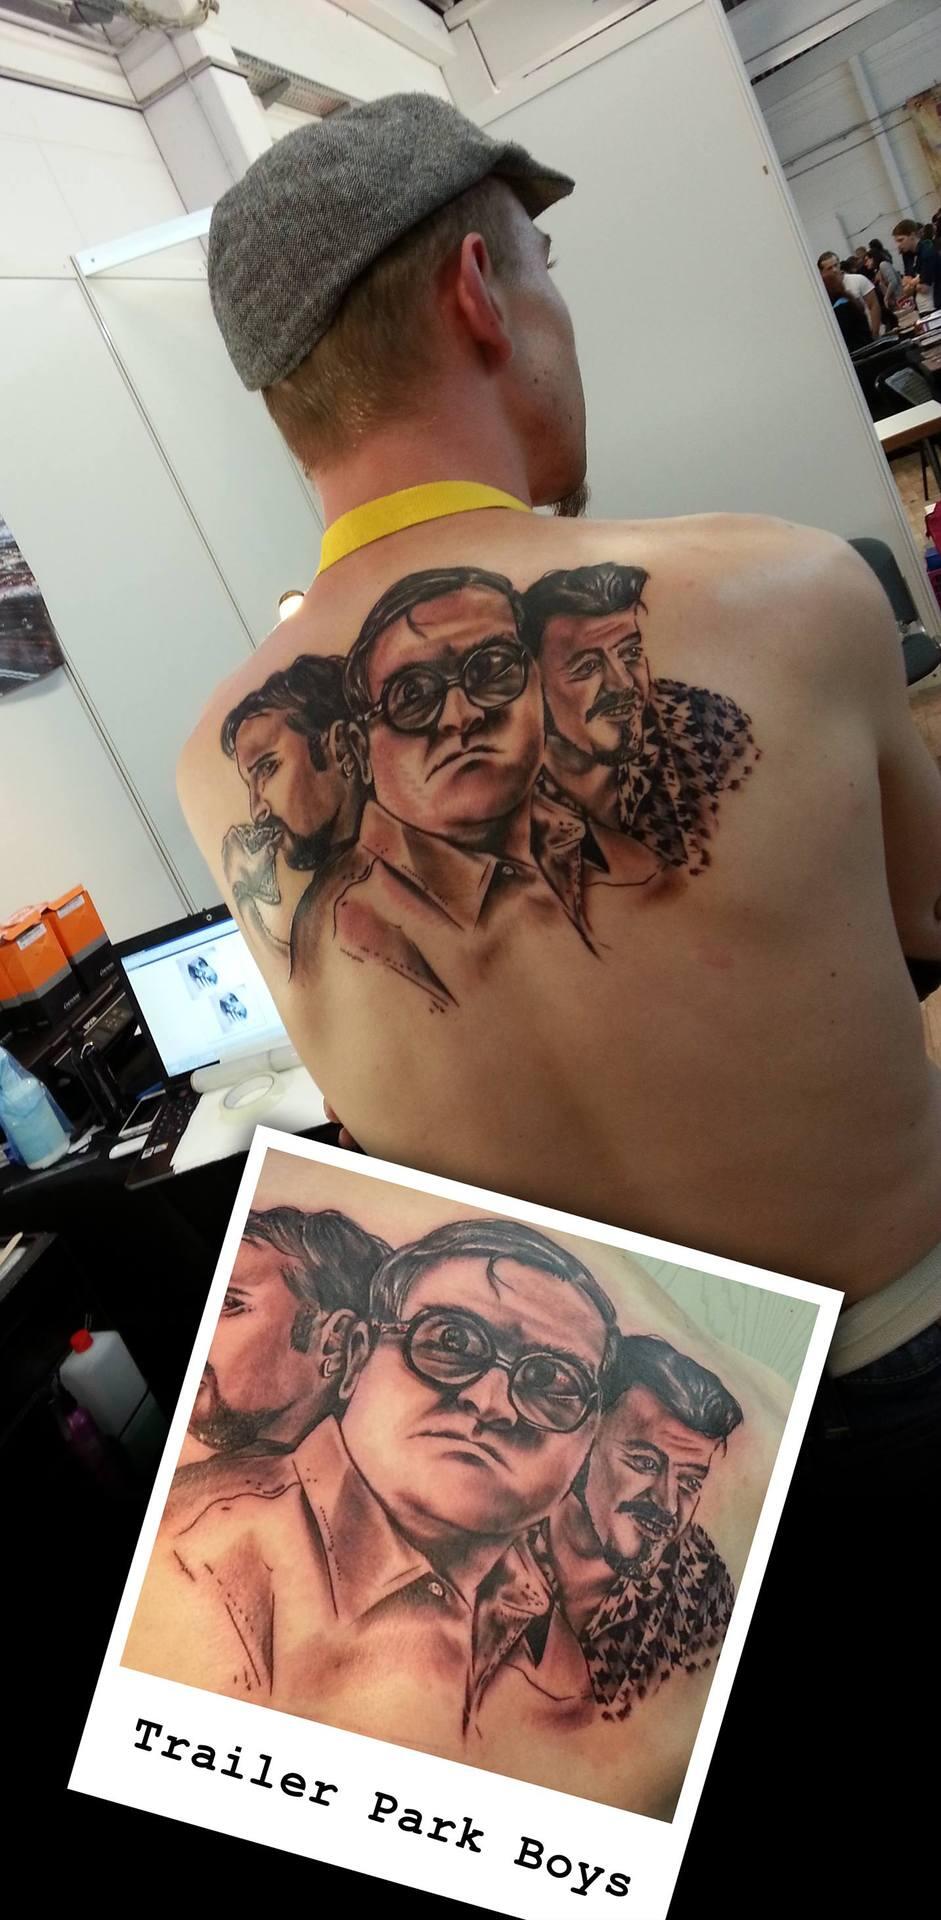 Redemption Ink Tattoo and Art Studio  Its always kind of cool when  celebrities notice your work Sarah Dunsworth of Trailer Park Boys seen  this tattoo I did on Instagram and messaged